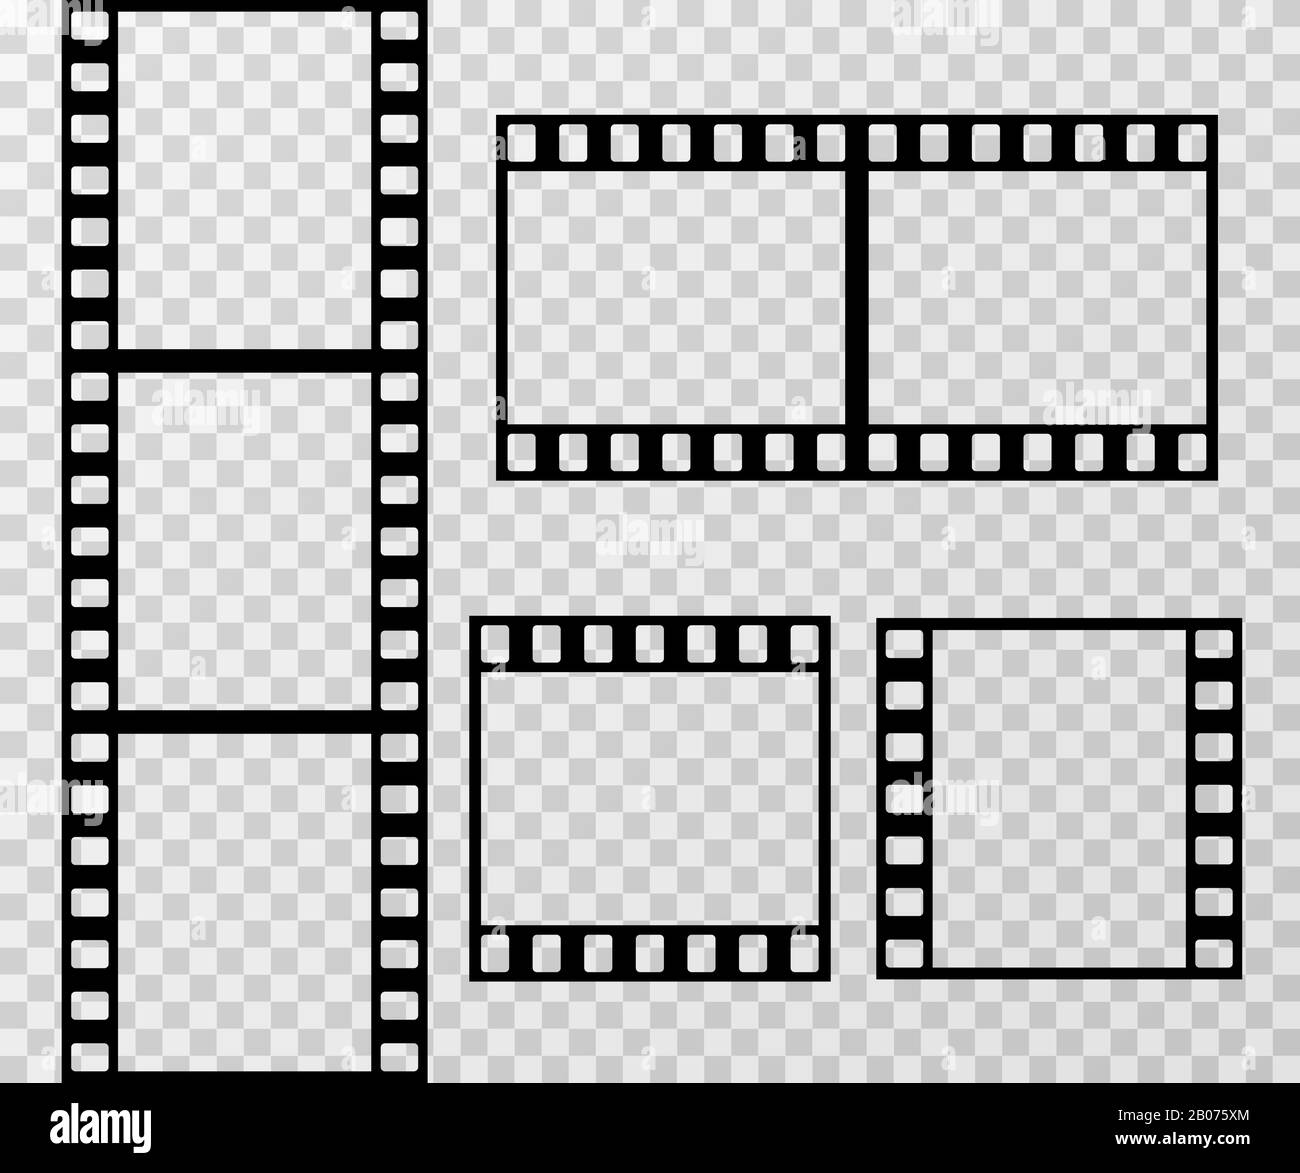 https://c8.alamy.com/comp/2B075XM/film-strip-photo-frame-vector-template-isolated-on-transparent-checkered-background-frame-of-filmstrip-picture-illustration-2B075XM.jpg